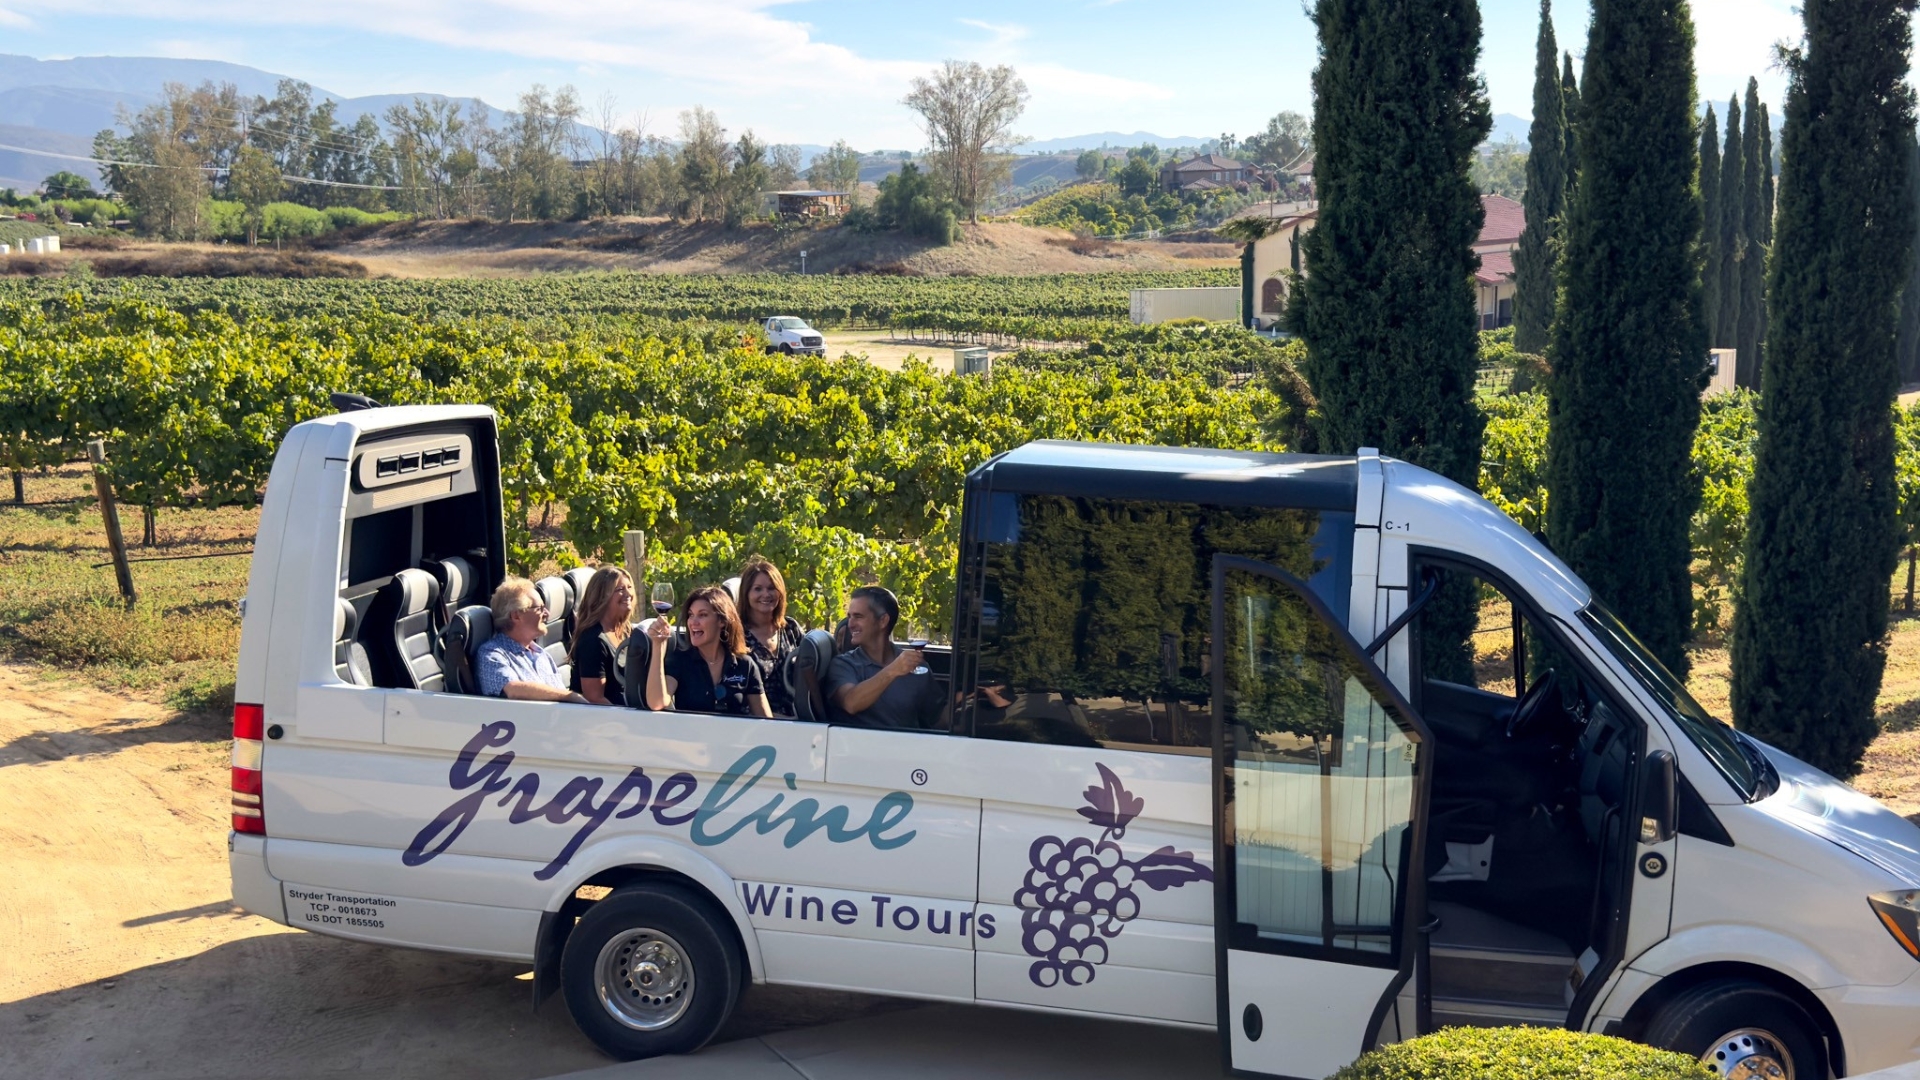 Grapeline Wine Tours - Hotels, Inns & Packages